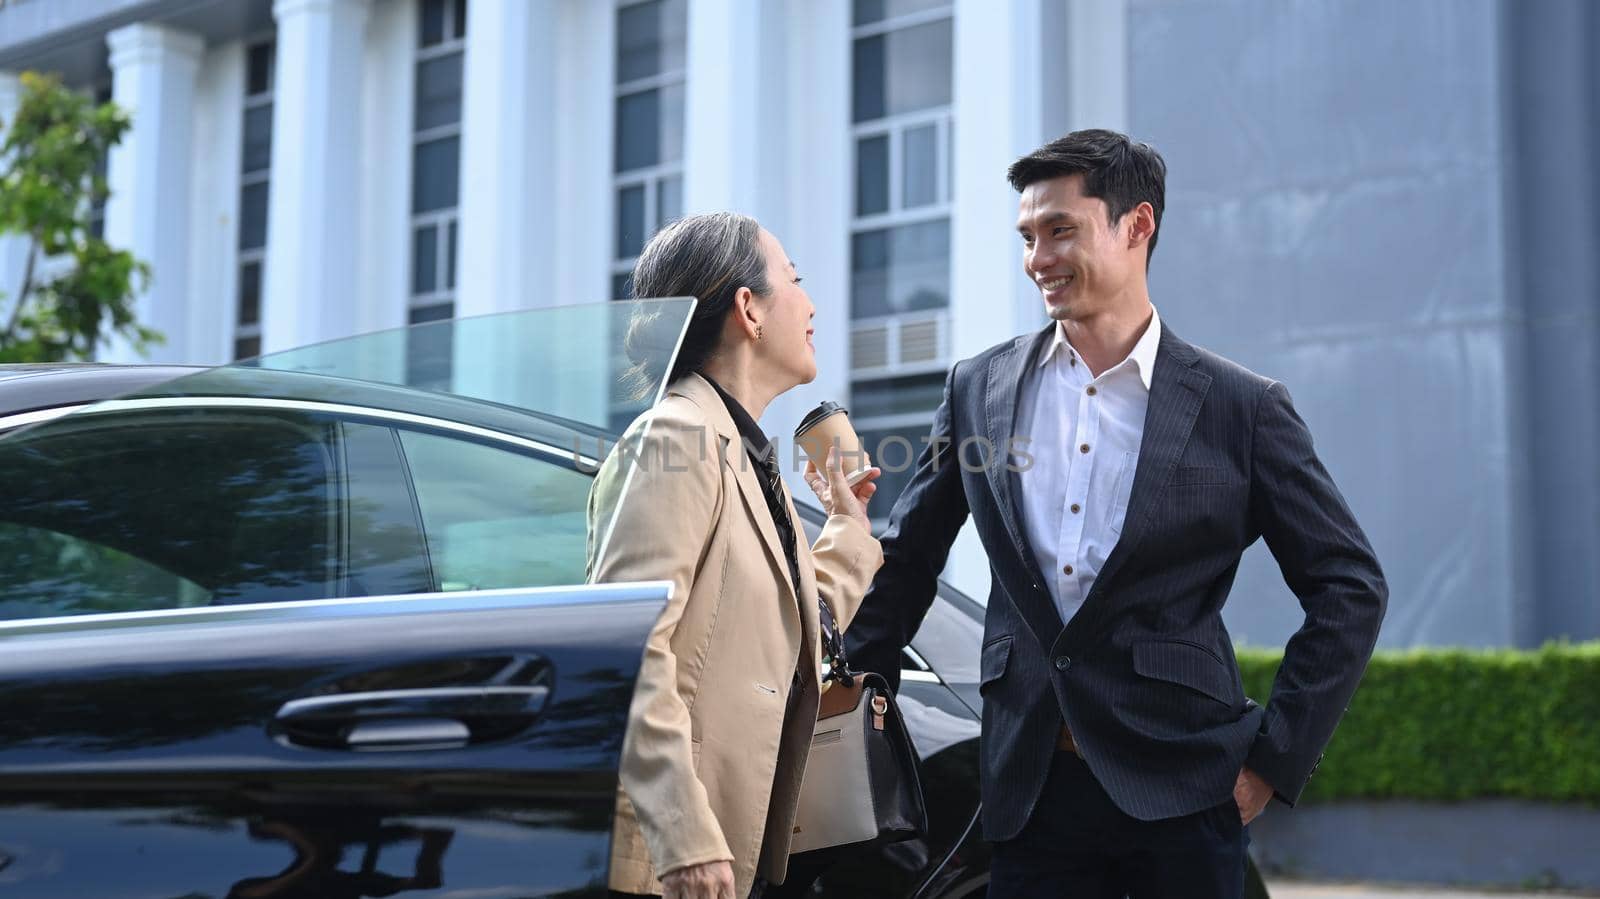 Senior business woman discussing something with young businessman while standing outdoors near a car by prathanchorruangsak